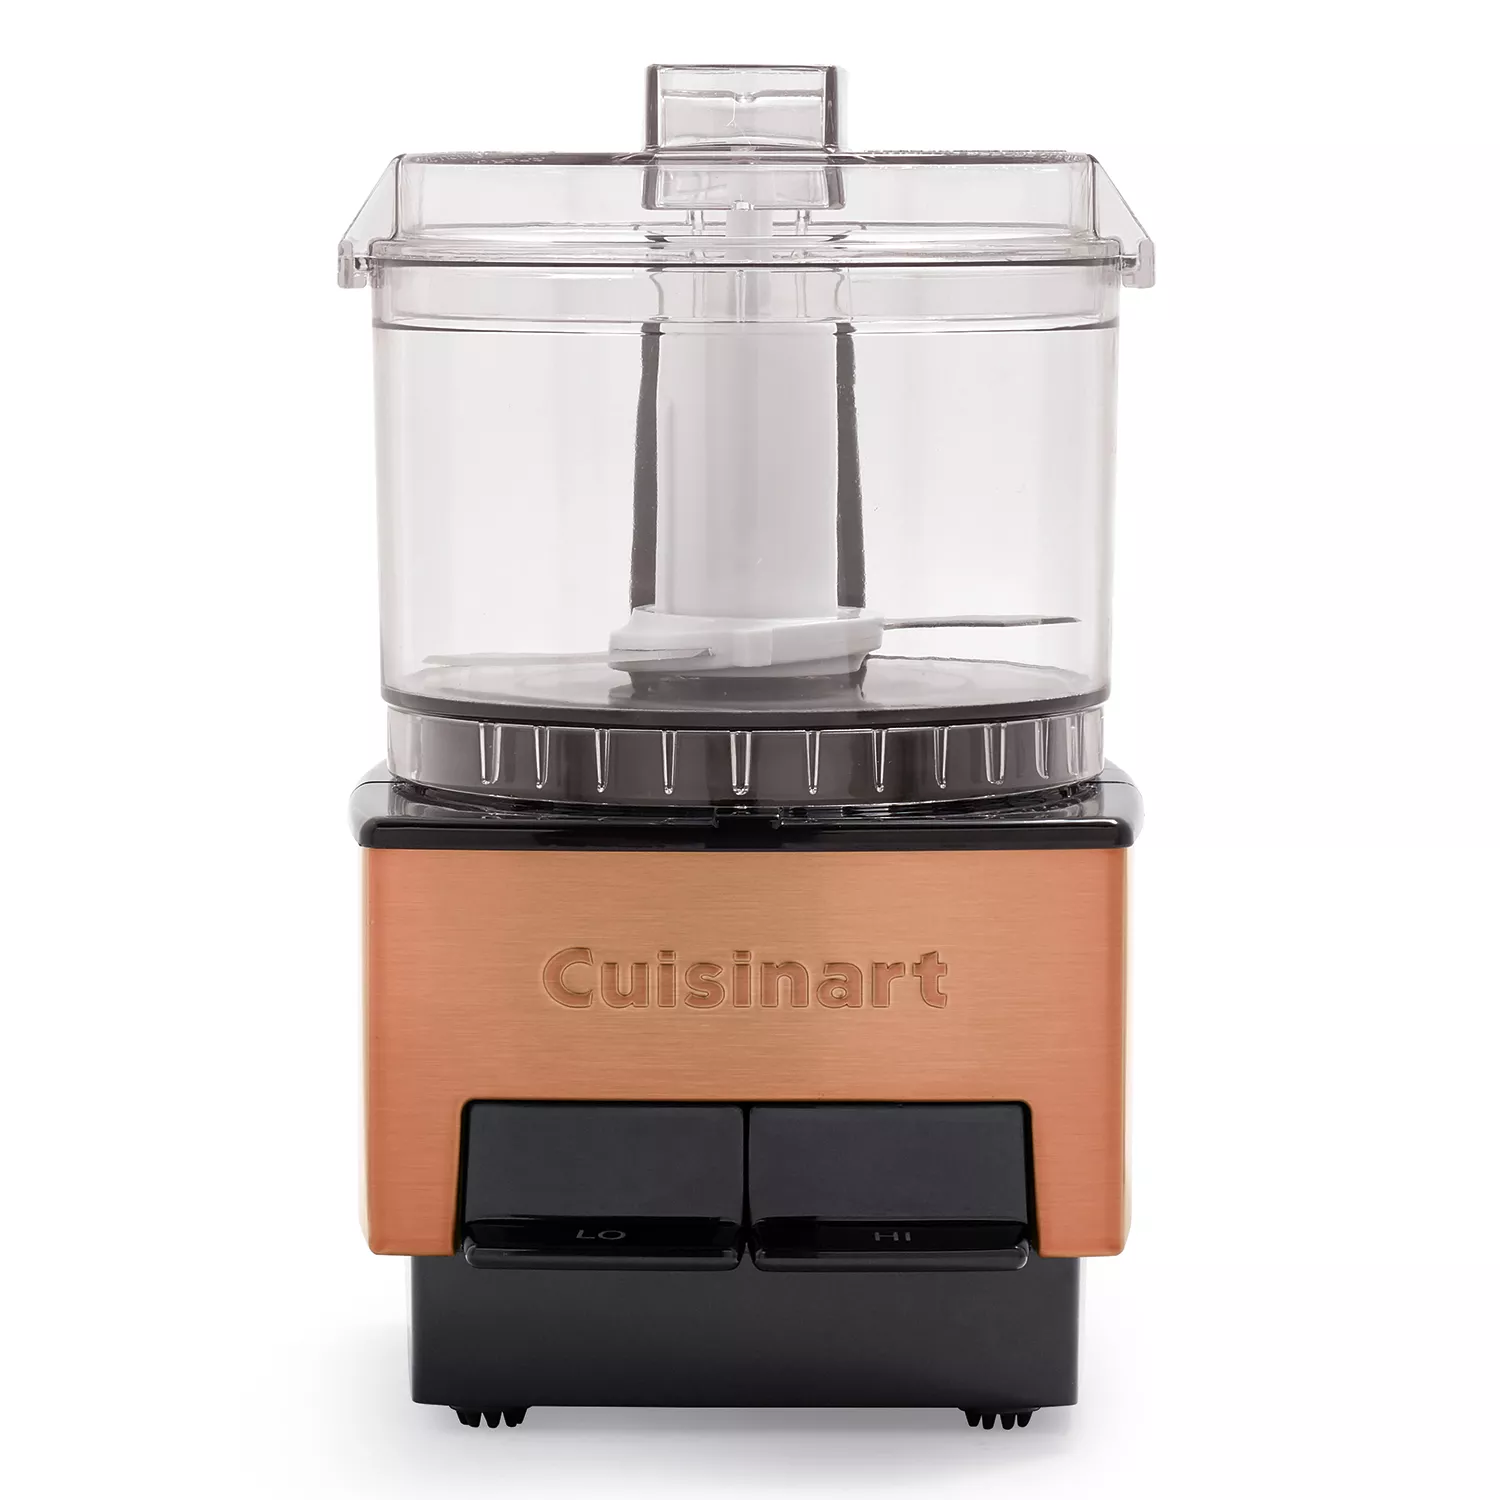 Cuisinart 21-ounce Workbowl with Cover